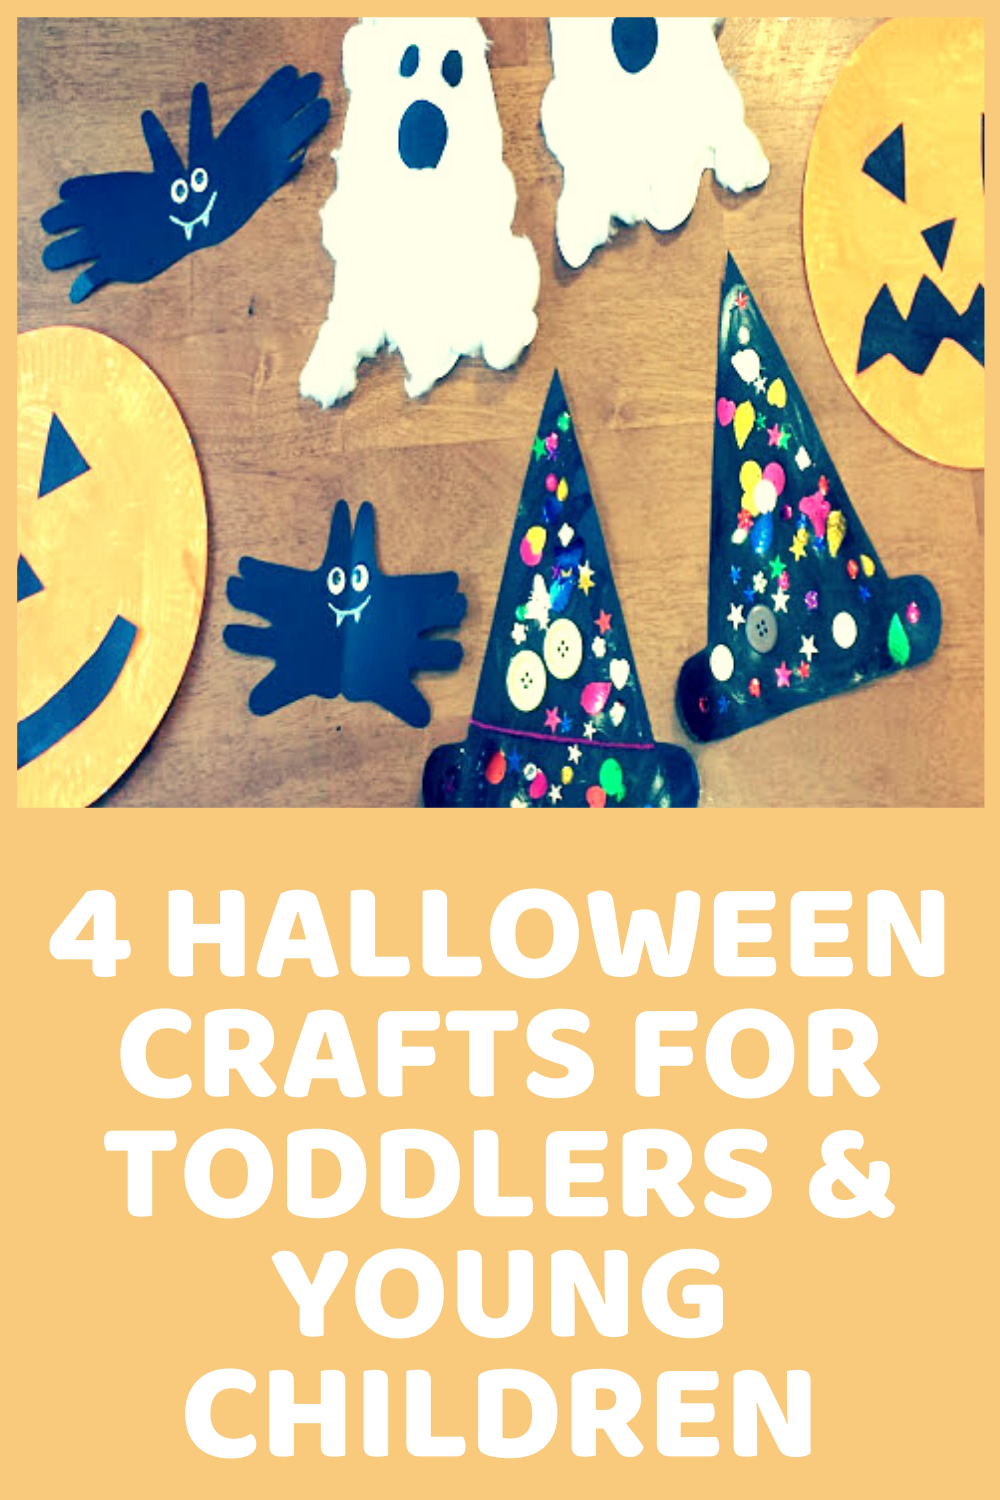 4 Halloween Crafts For Toddlers & Young Children